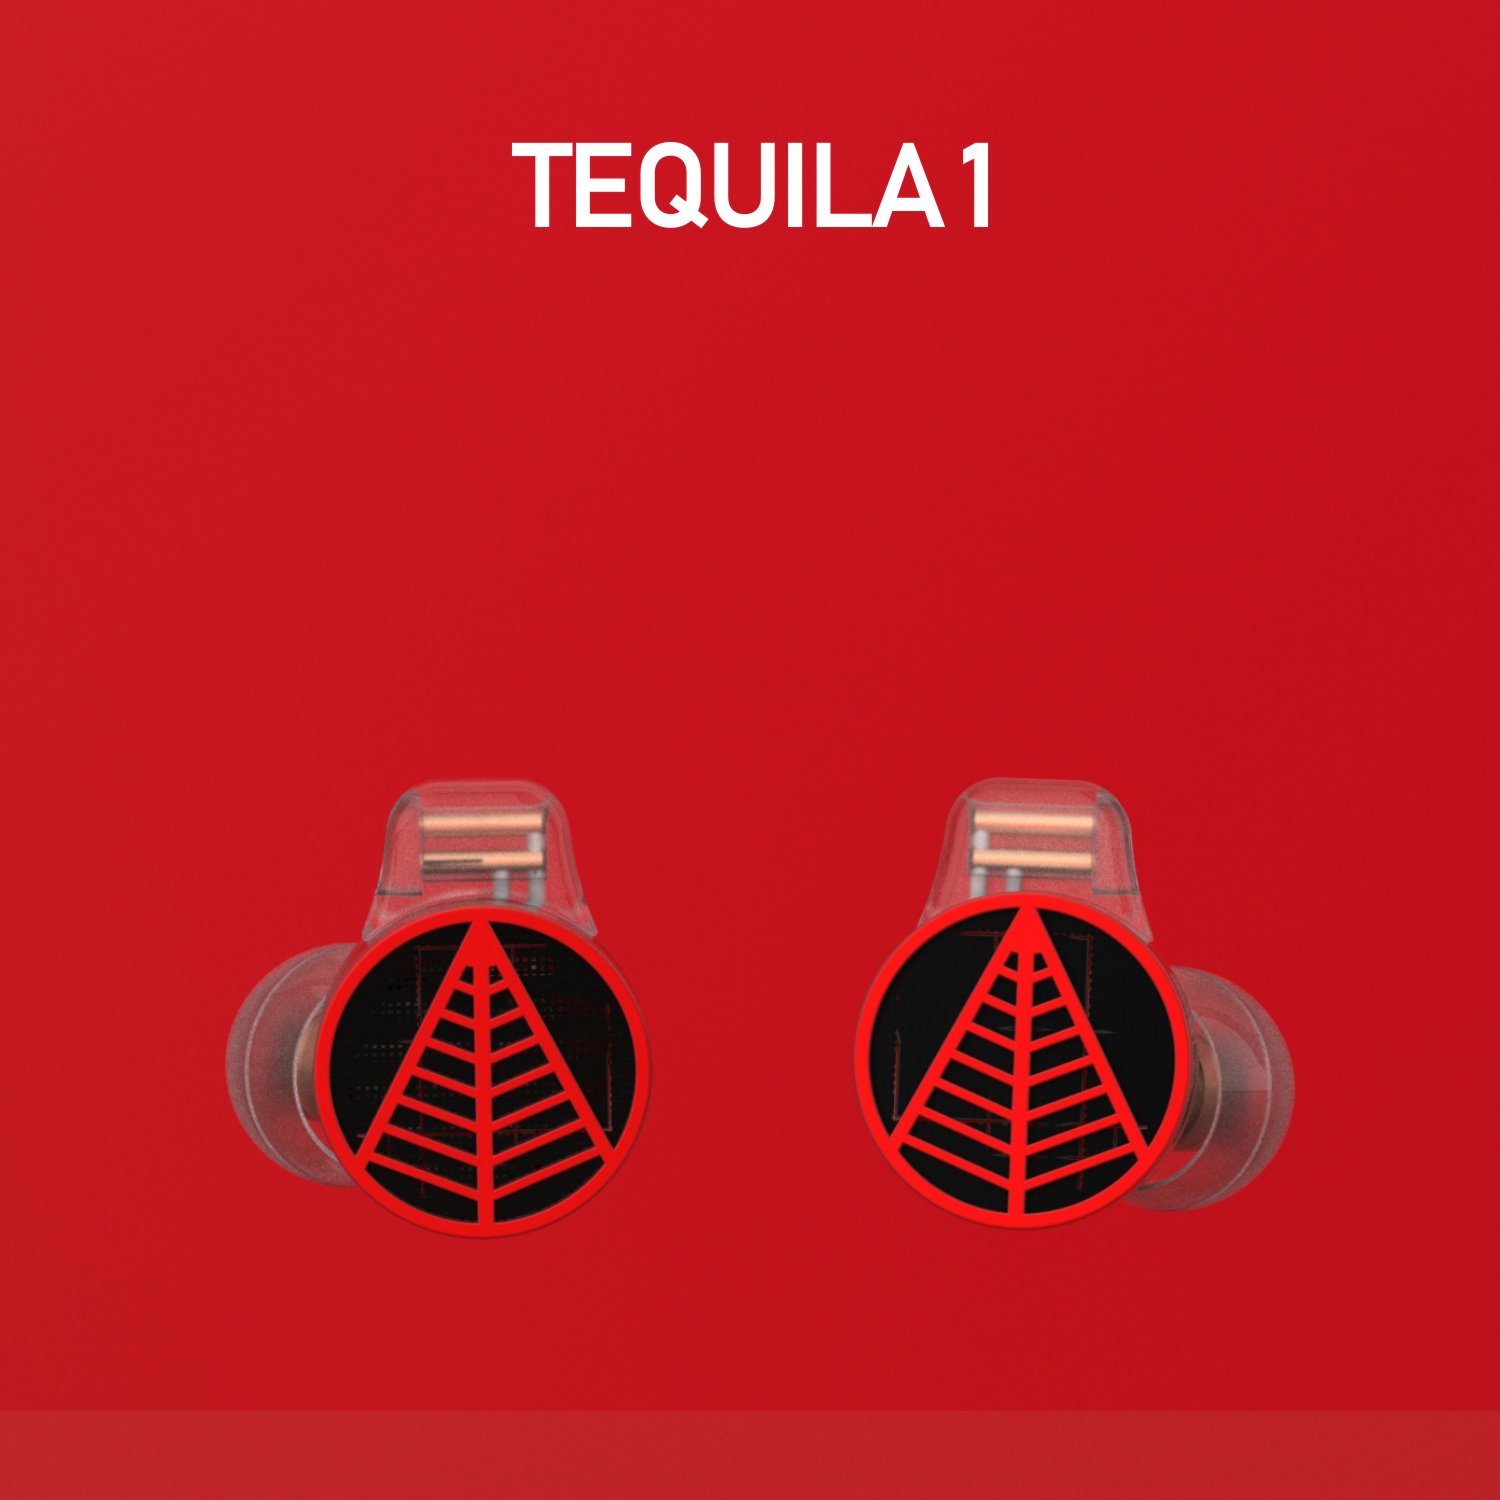 TEQUILAI